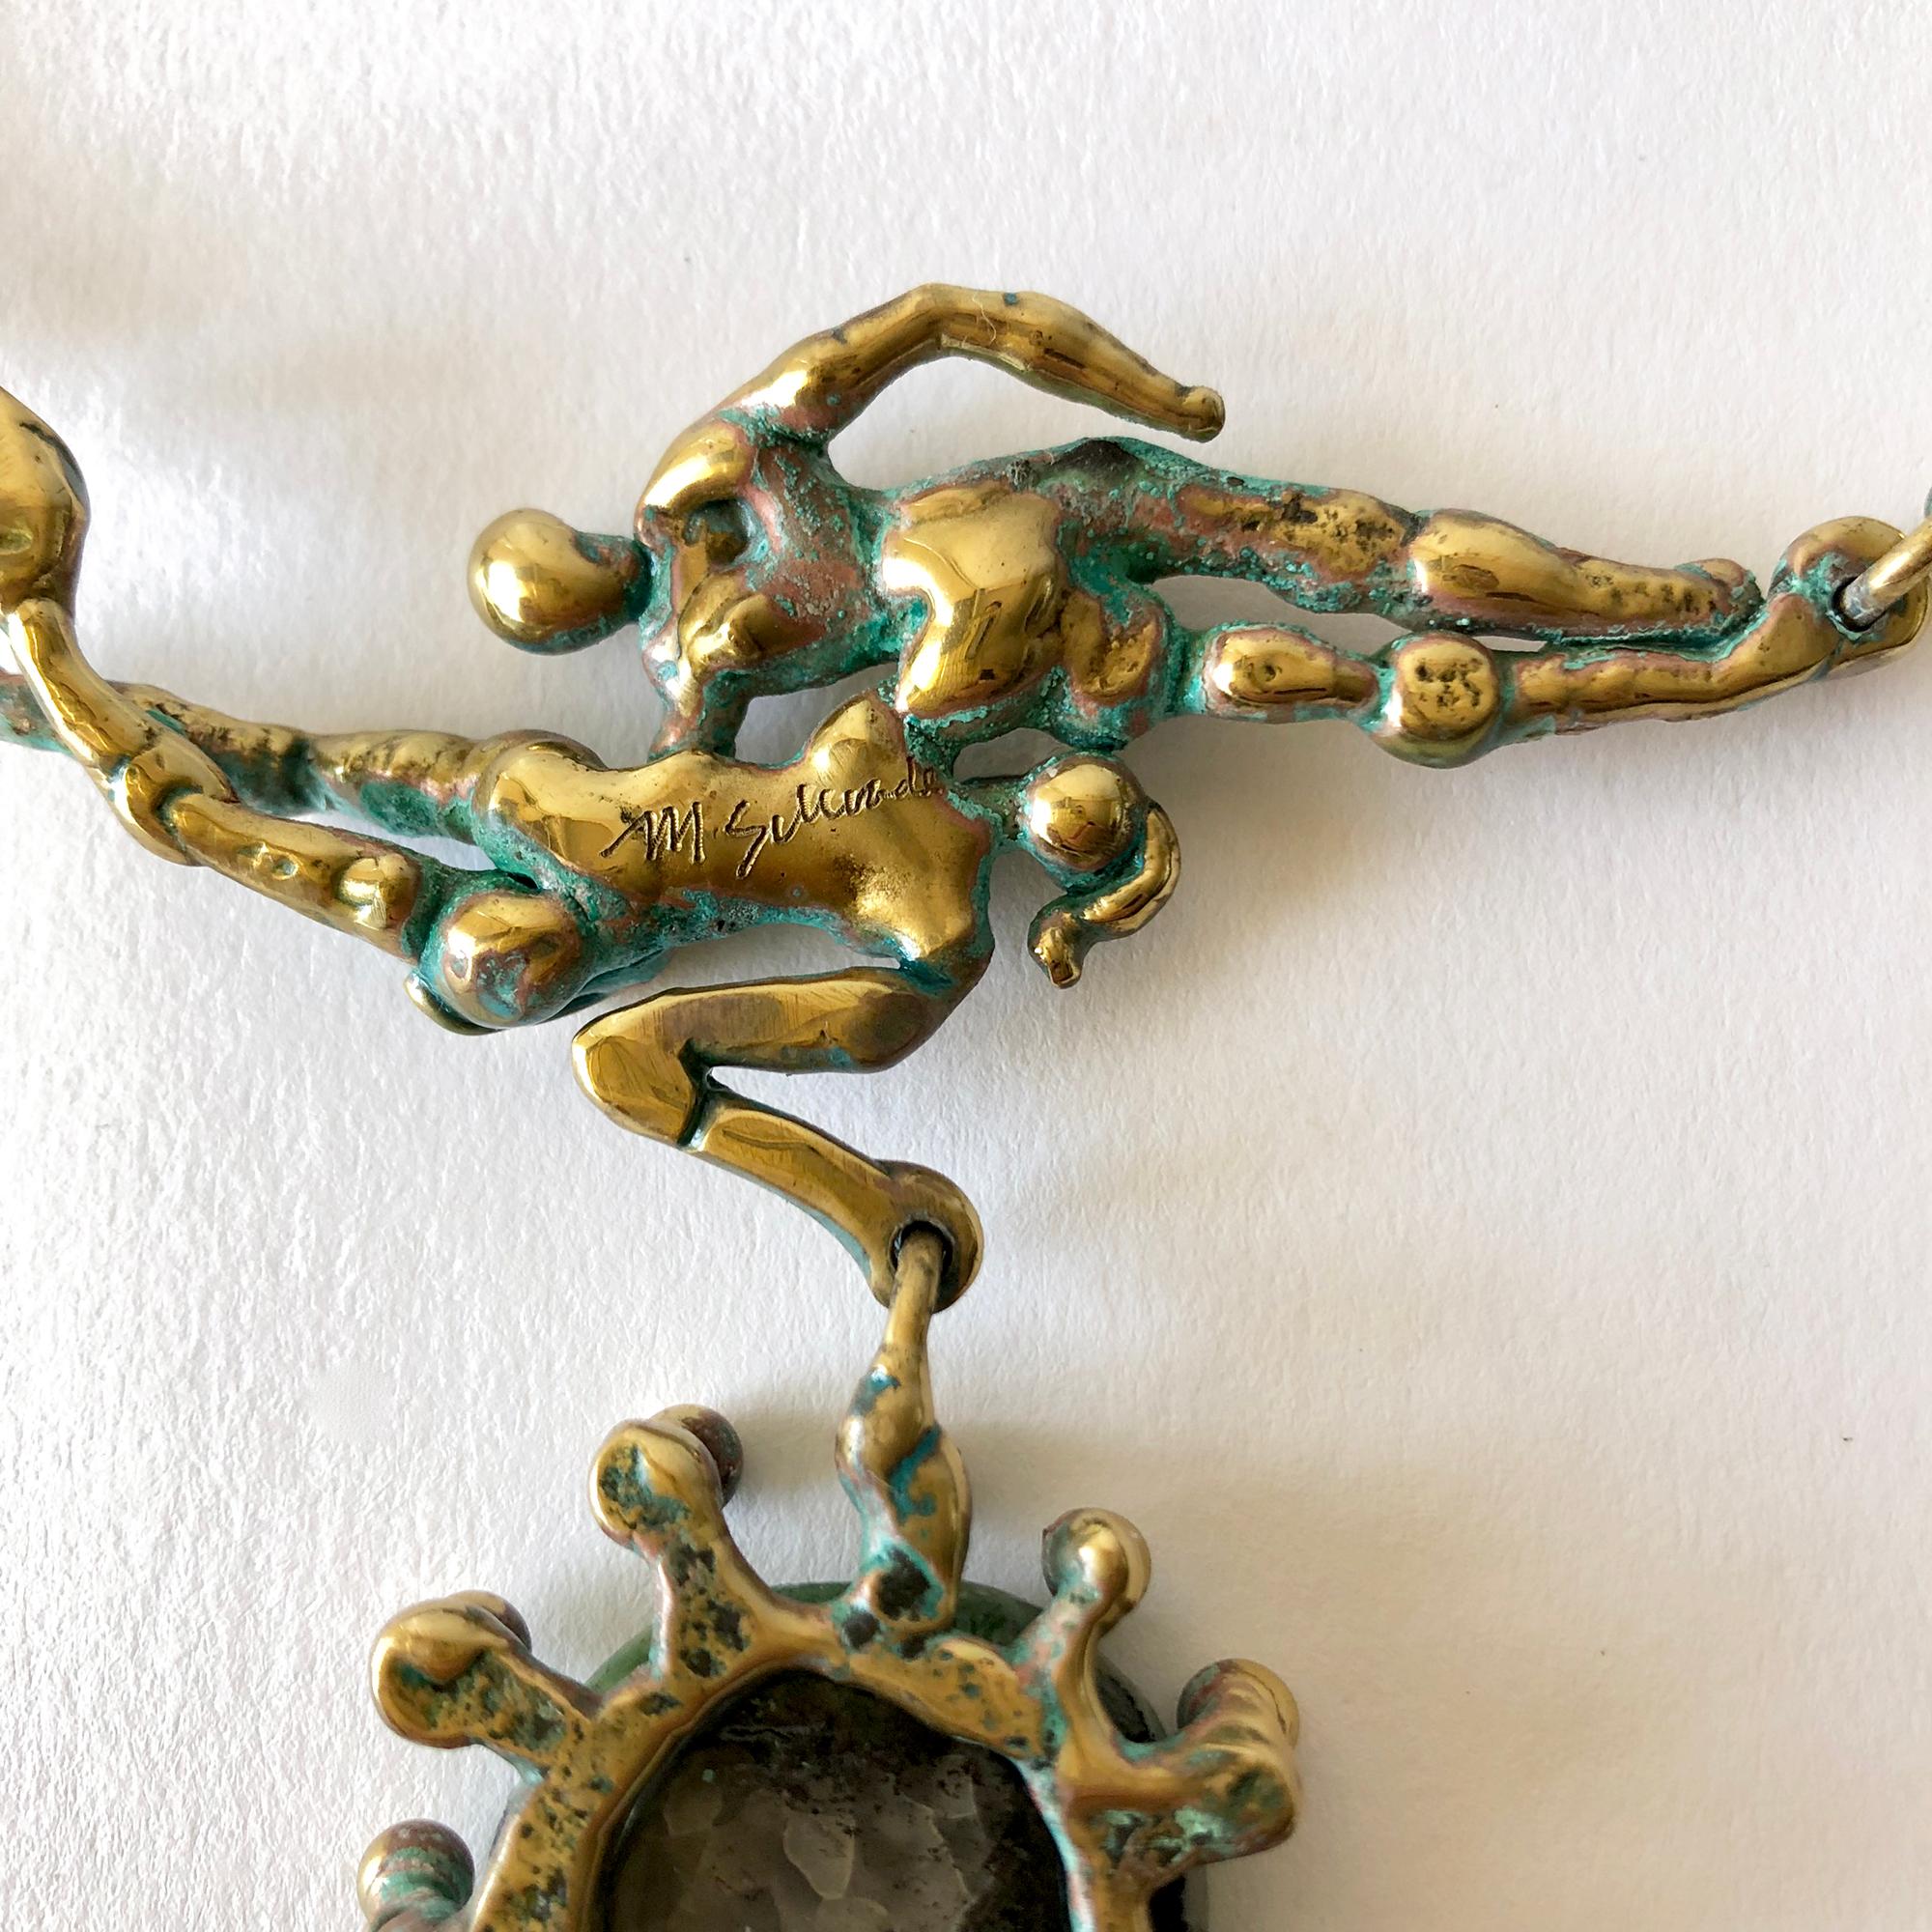 Michael Schwade Patinated Bronze Glass Nude Space Ballet Necklace 1